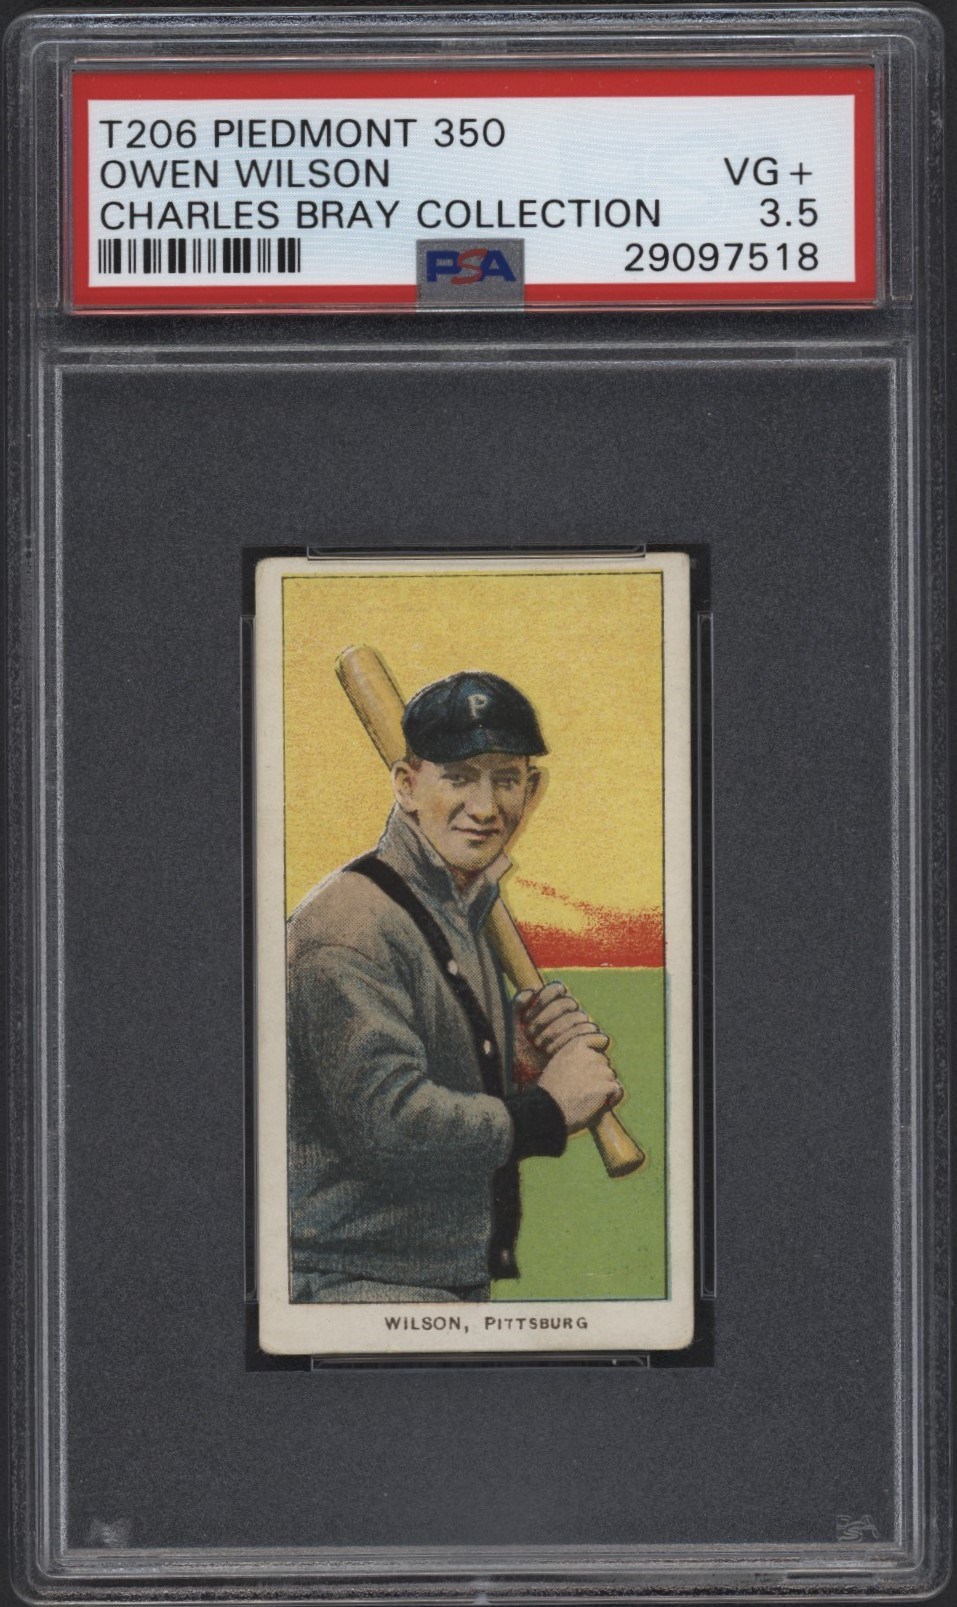 - T206 Piedmont 350 Owen Wilson PSA 3.5 From the Charles Bray Collection